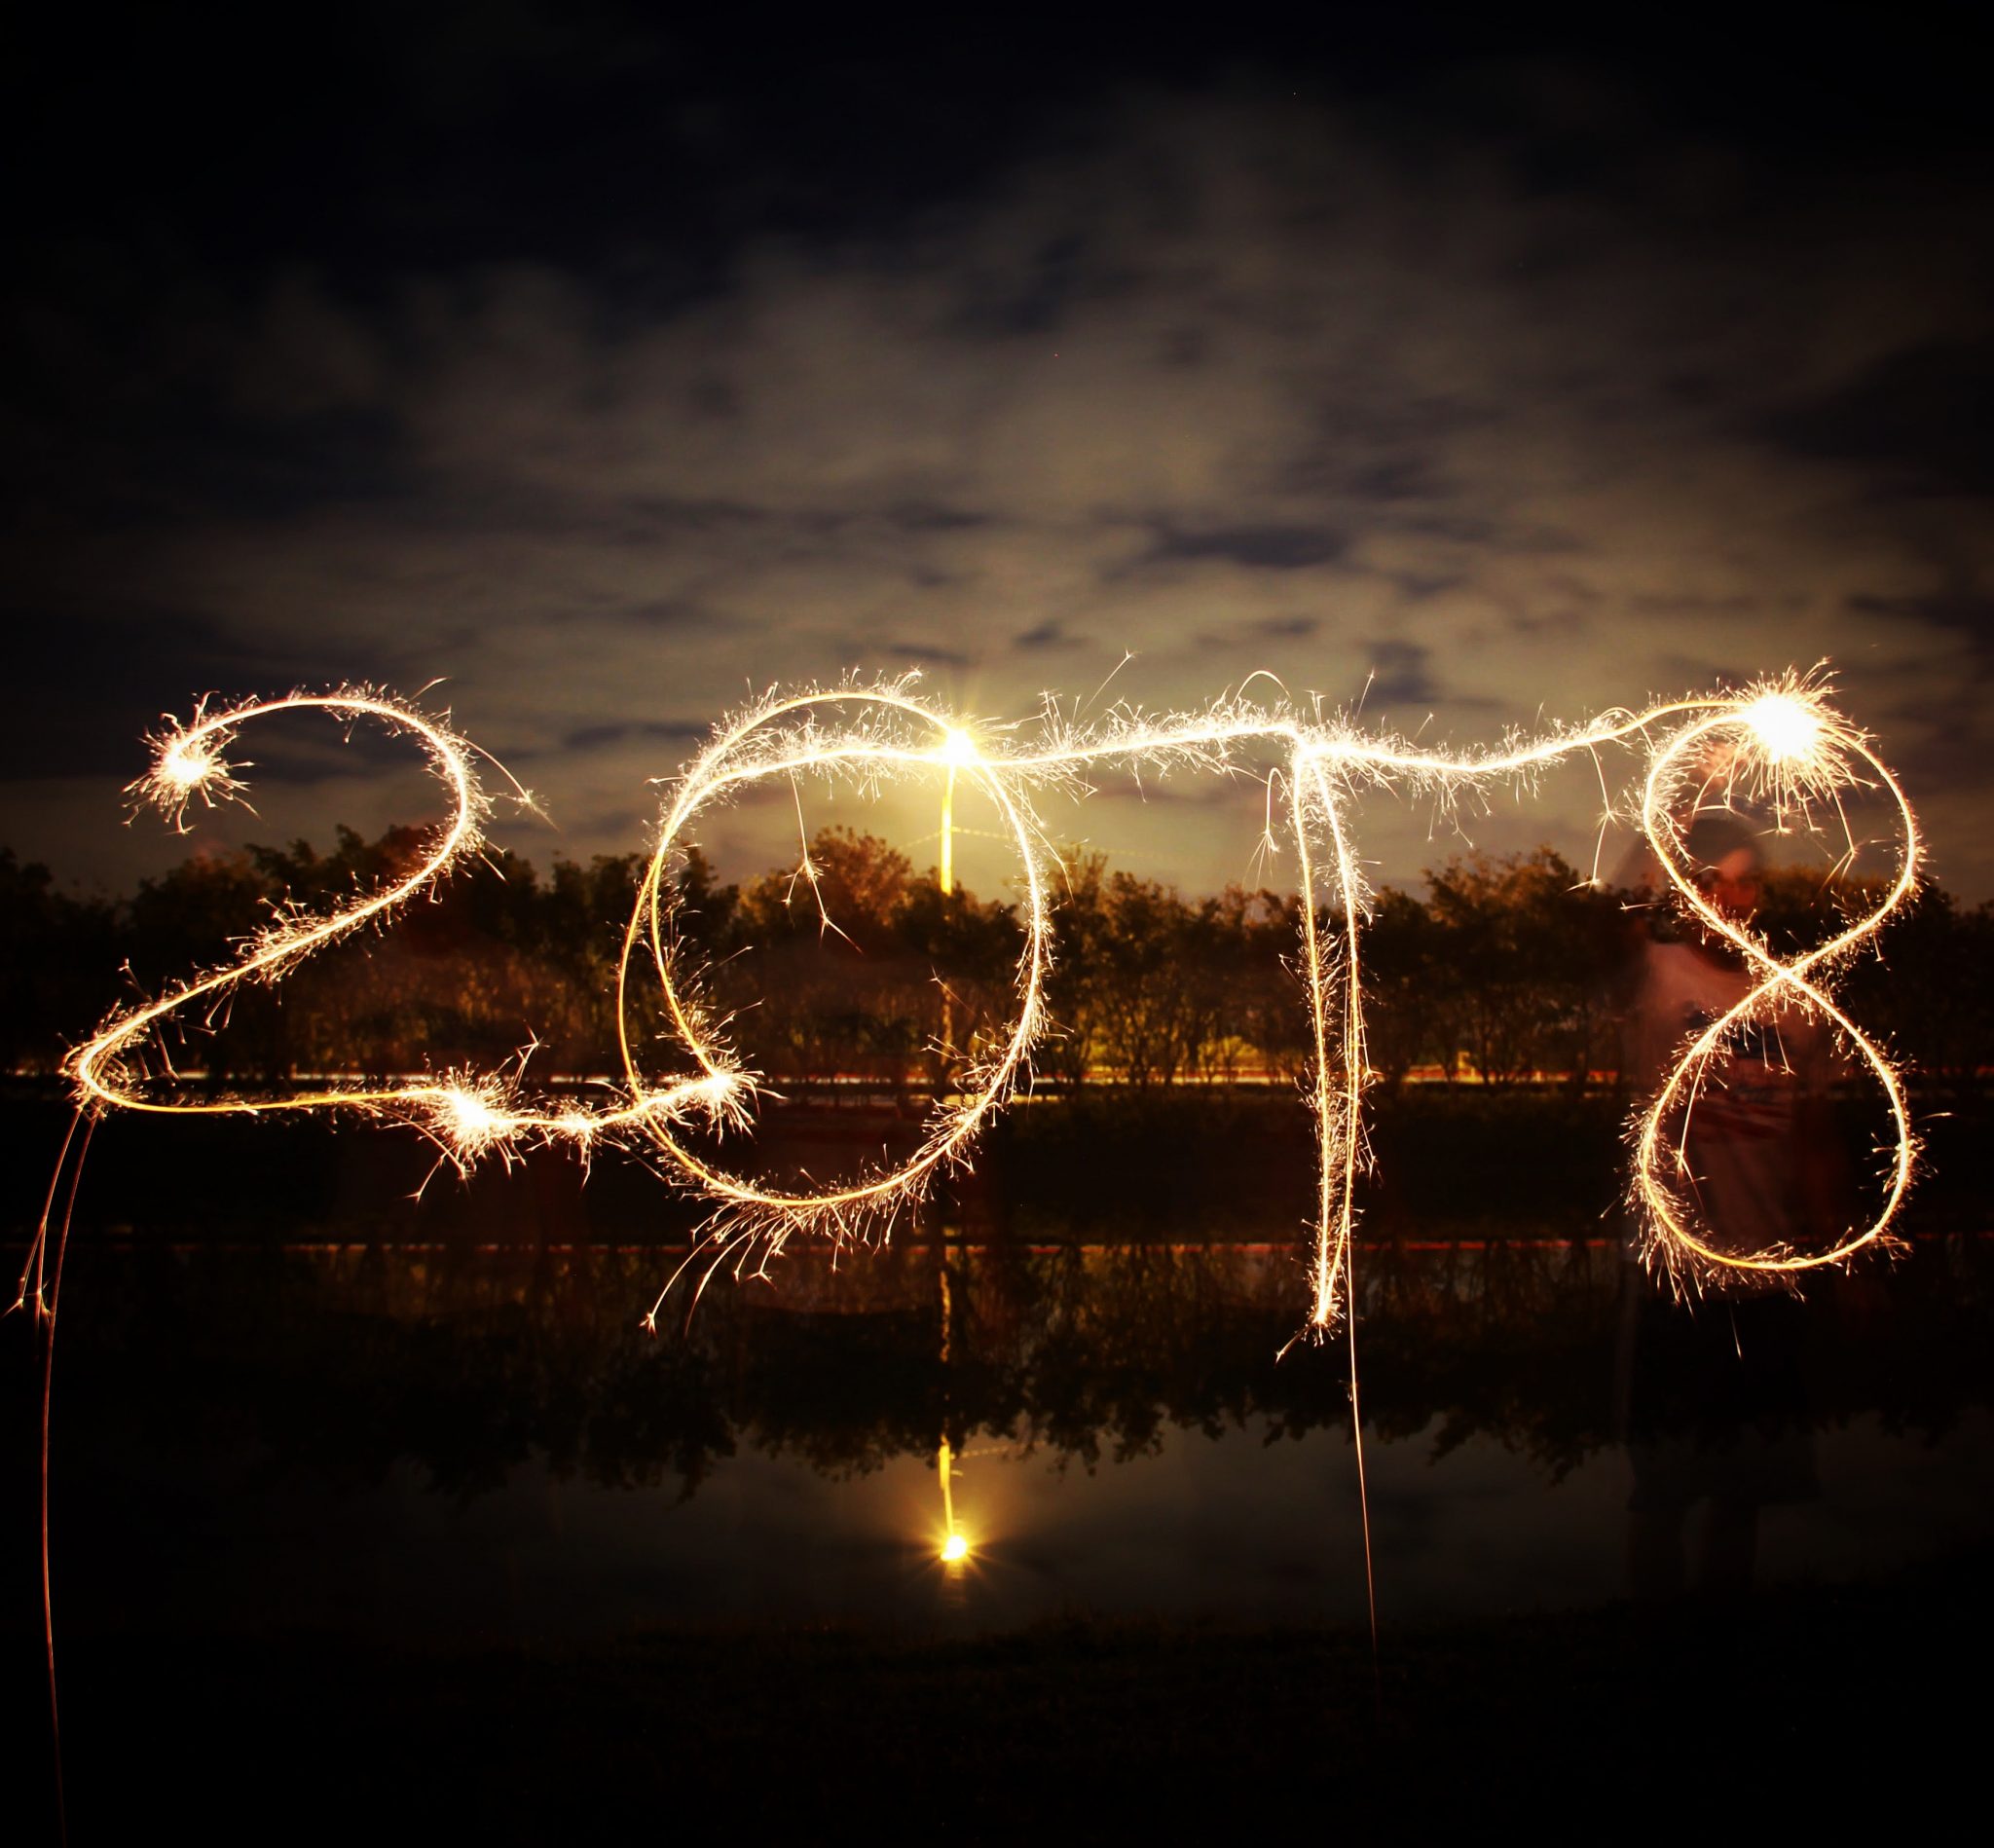 2018 in fireworks and sparklers